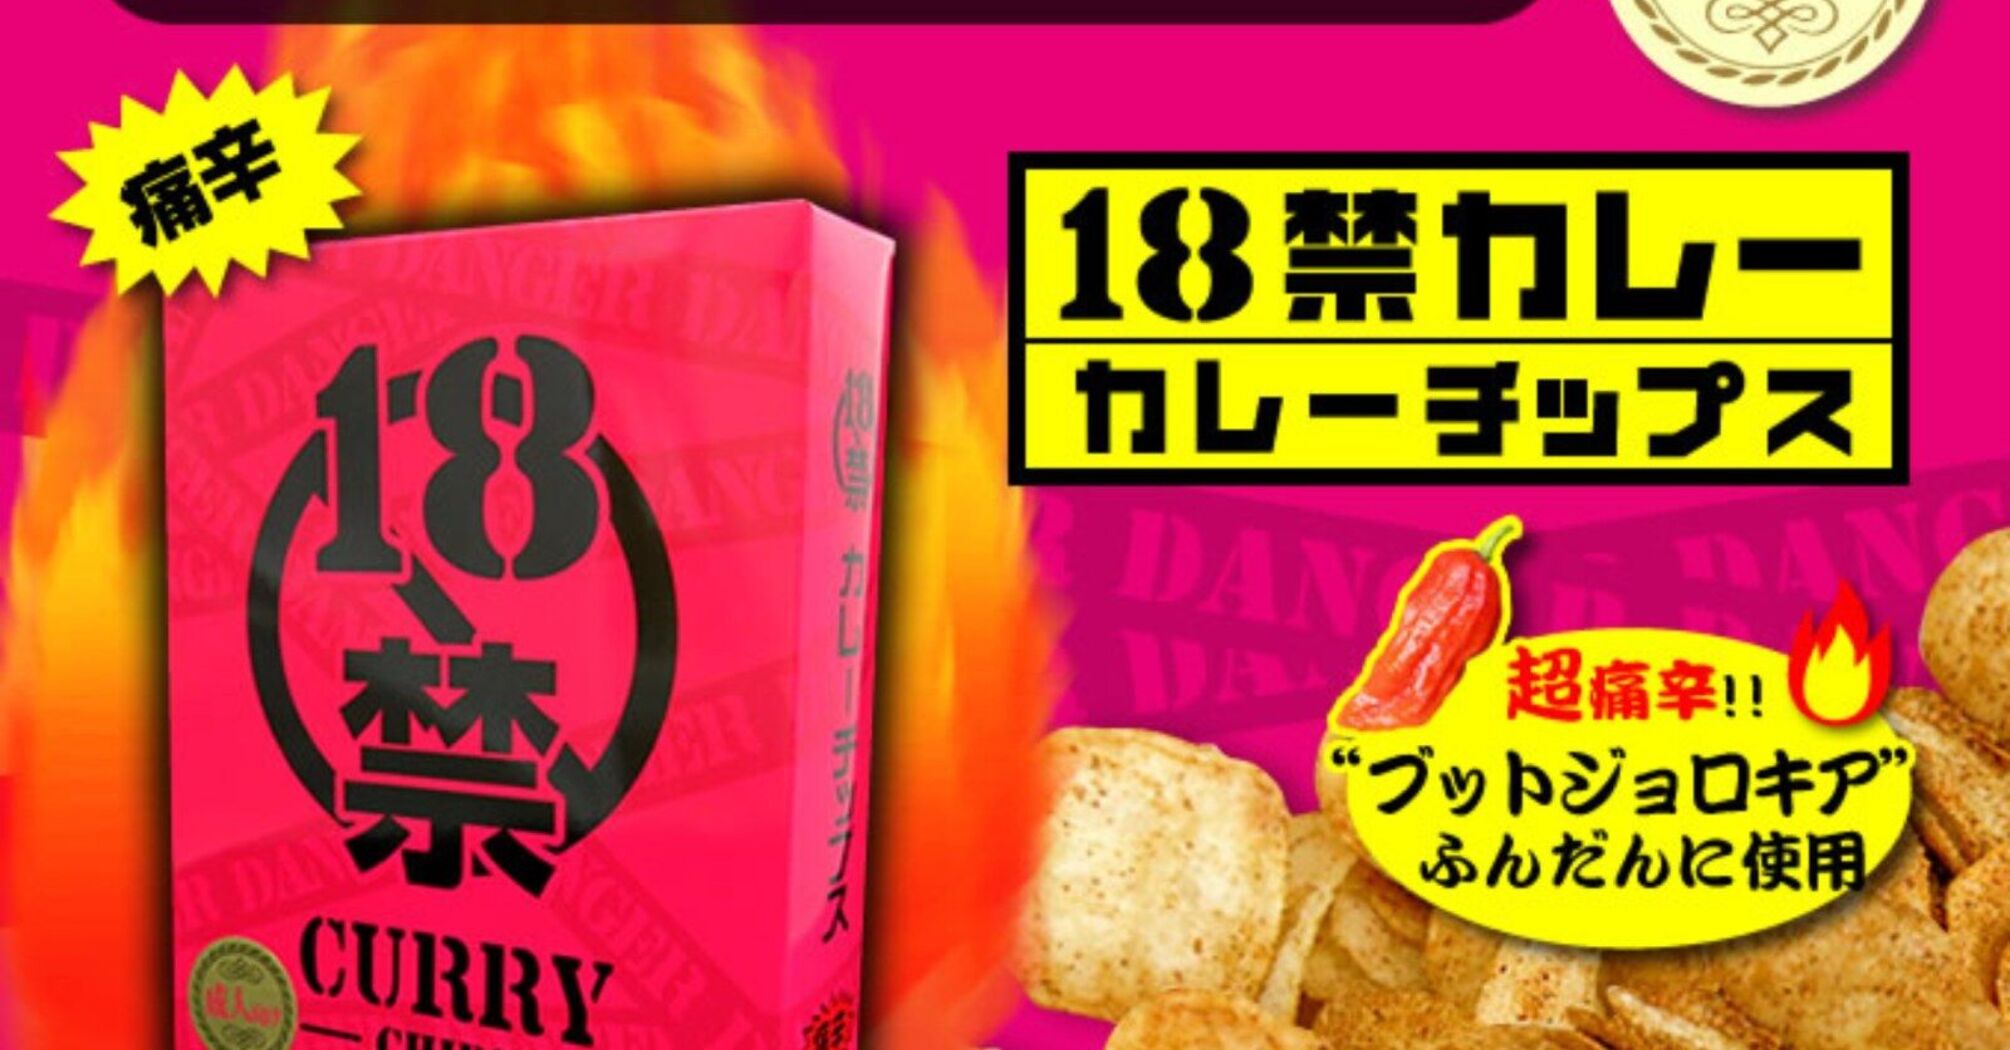 Japanese high school students hospitalized after eating 'super spicy' chips